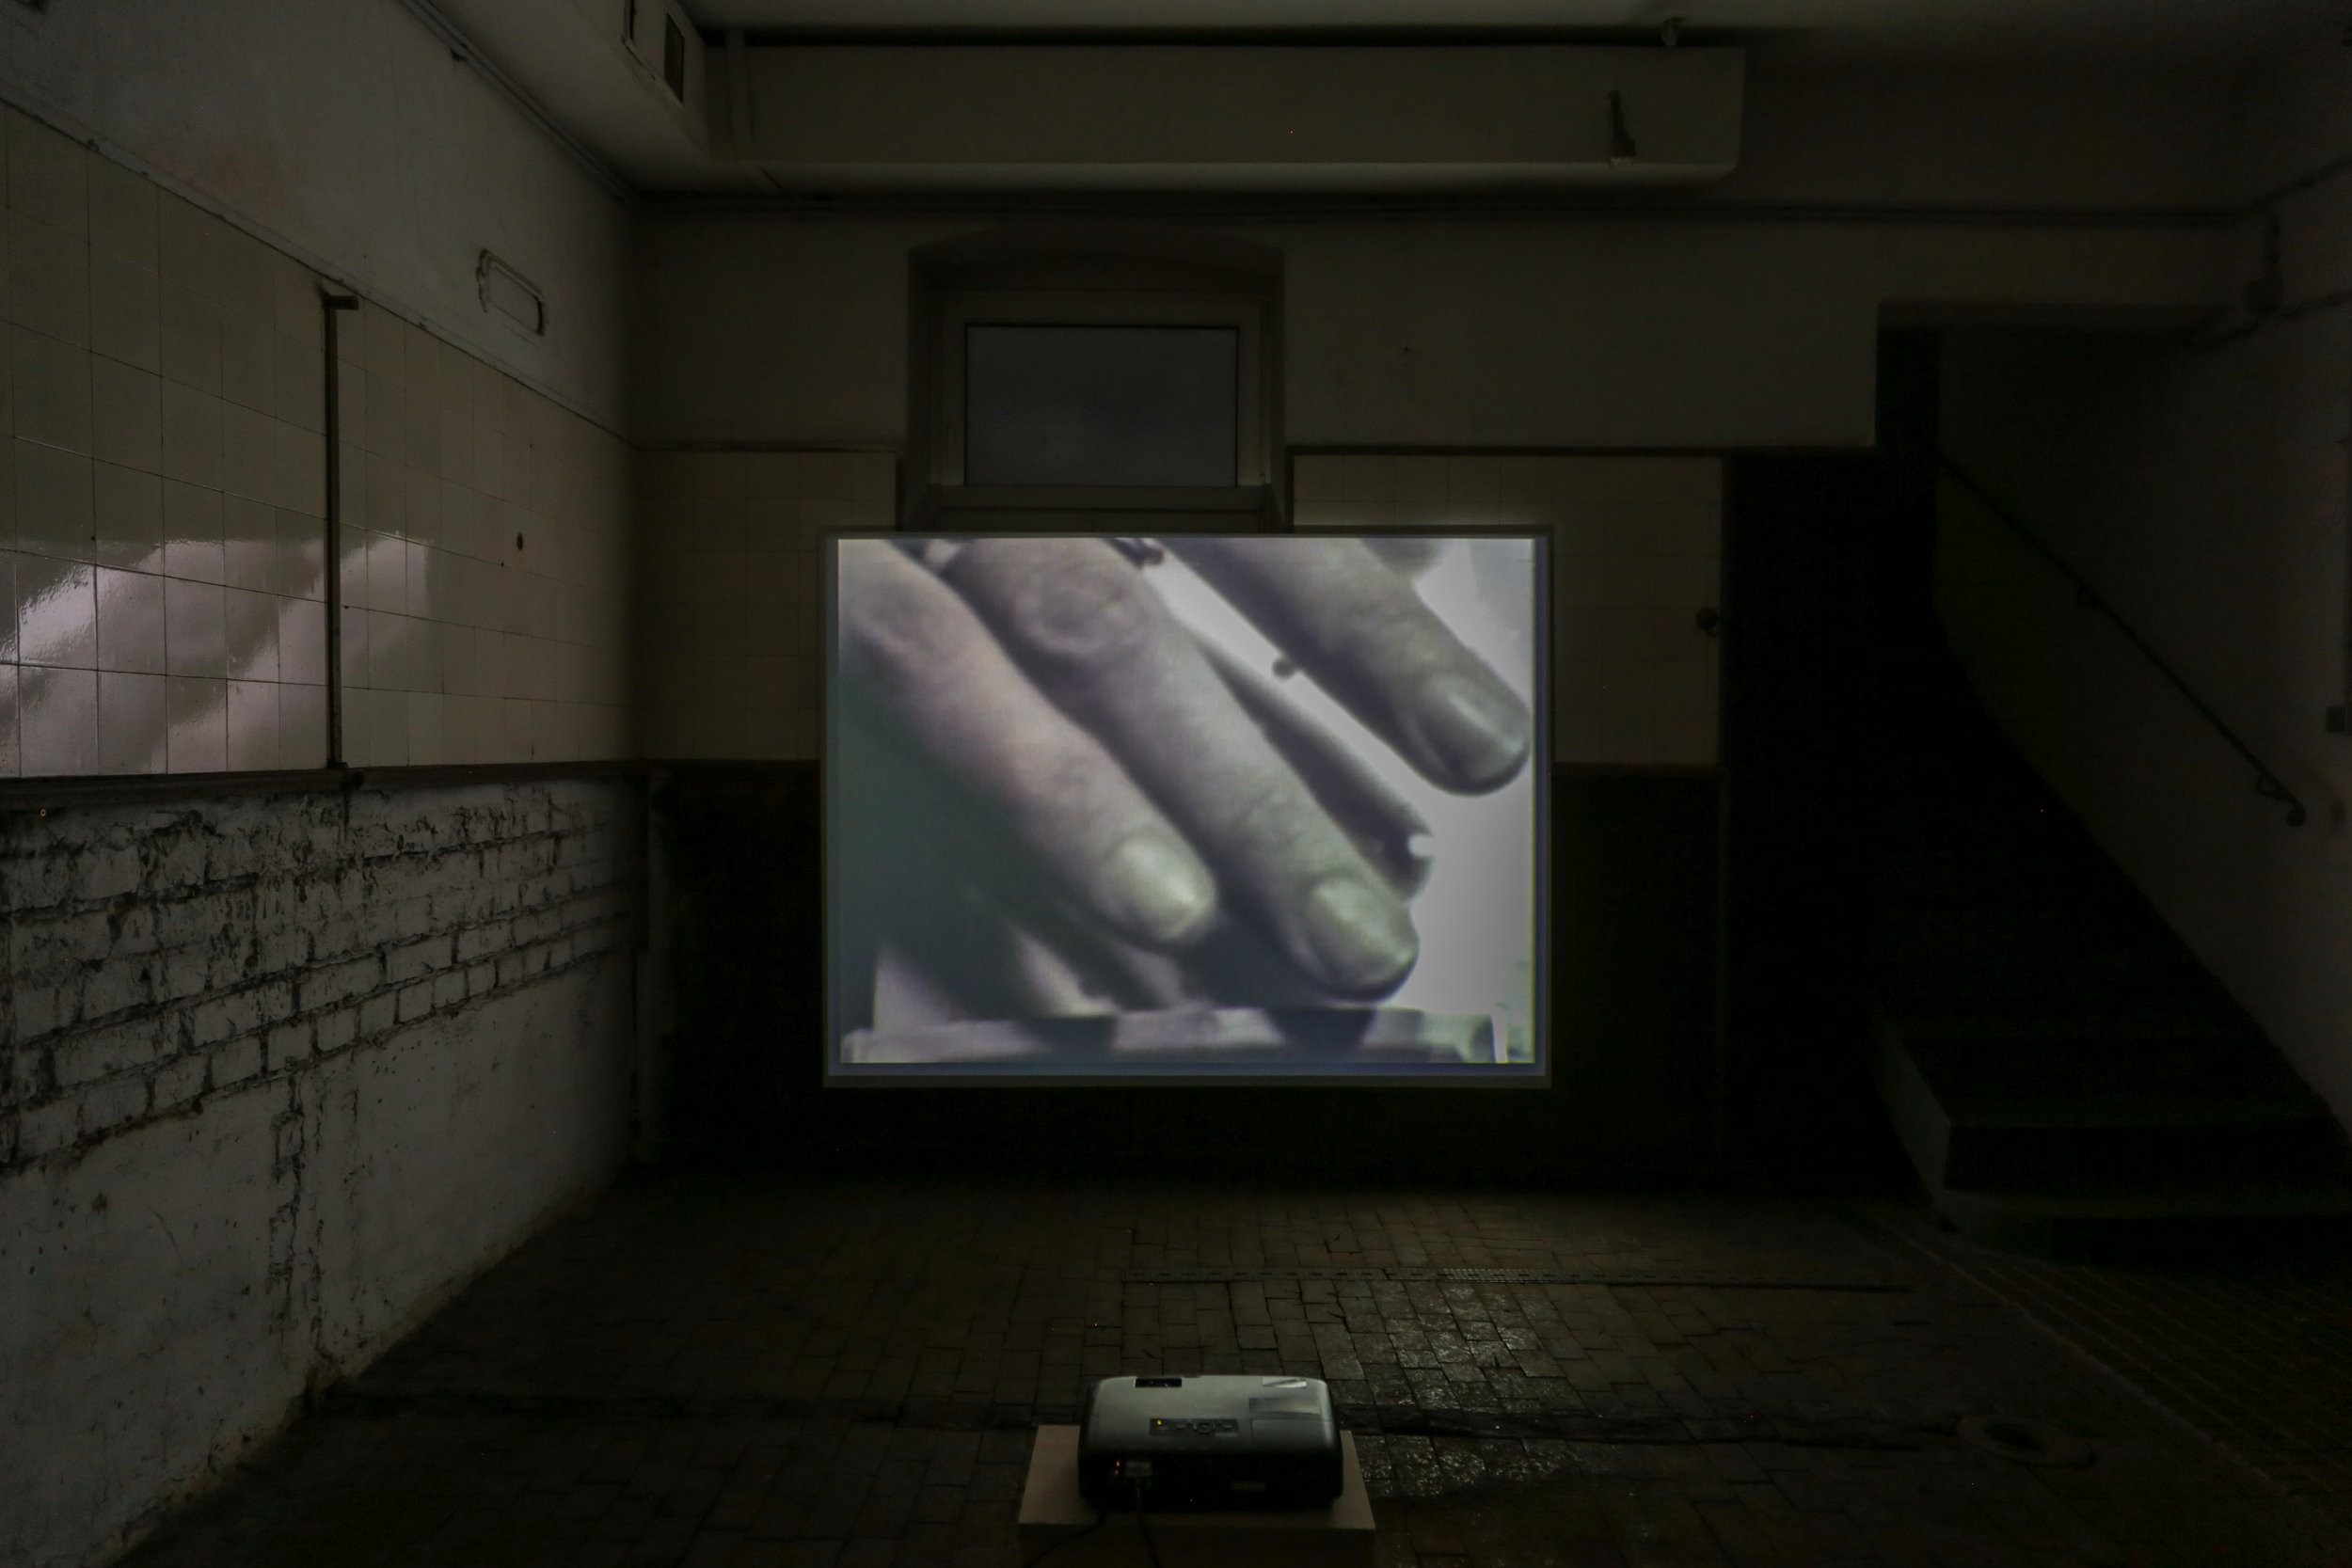   fig27 installation view Joan Jonas, Performance, 1979, 00:11:43., In collections: De Appel, LIMA  